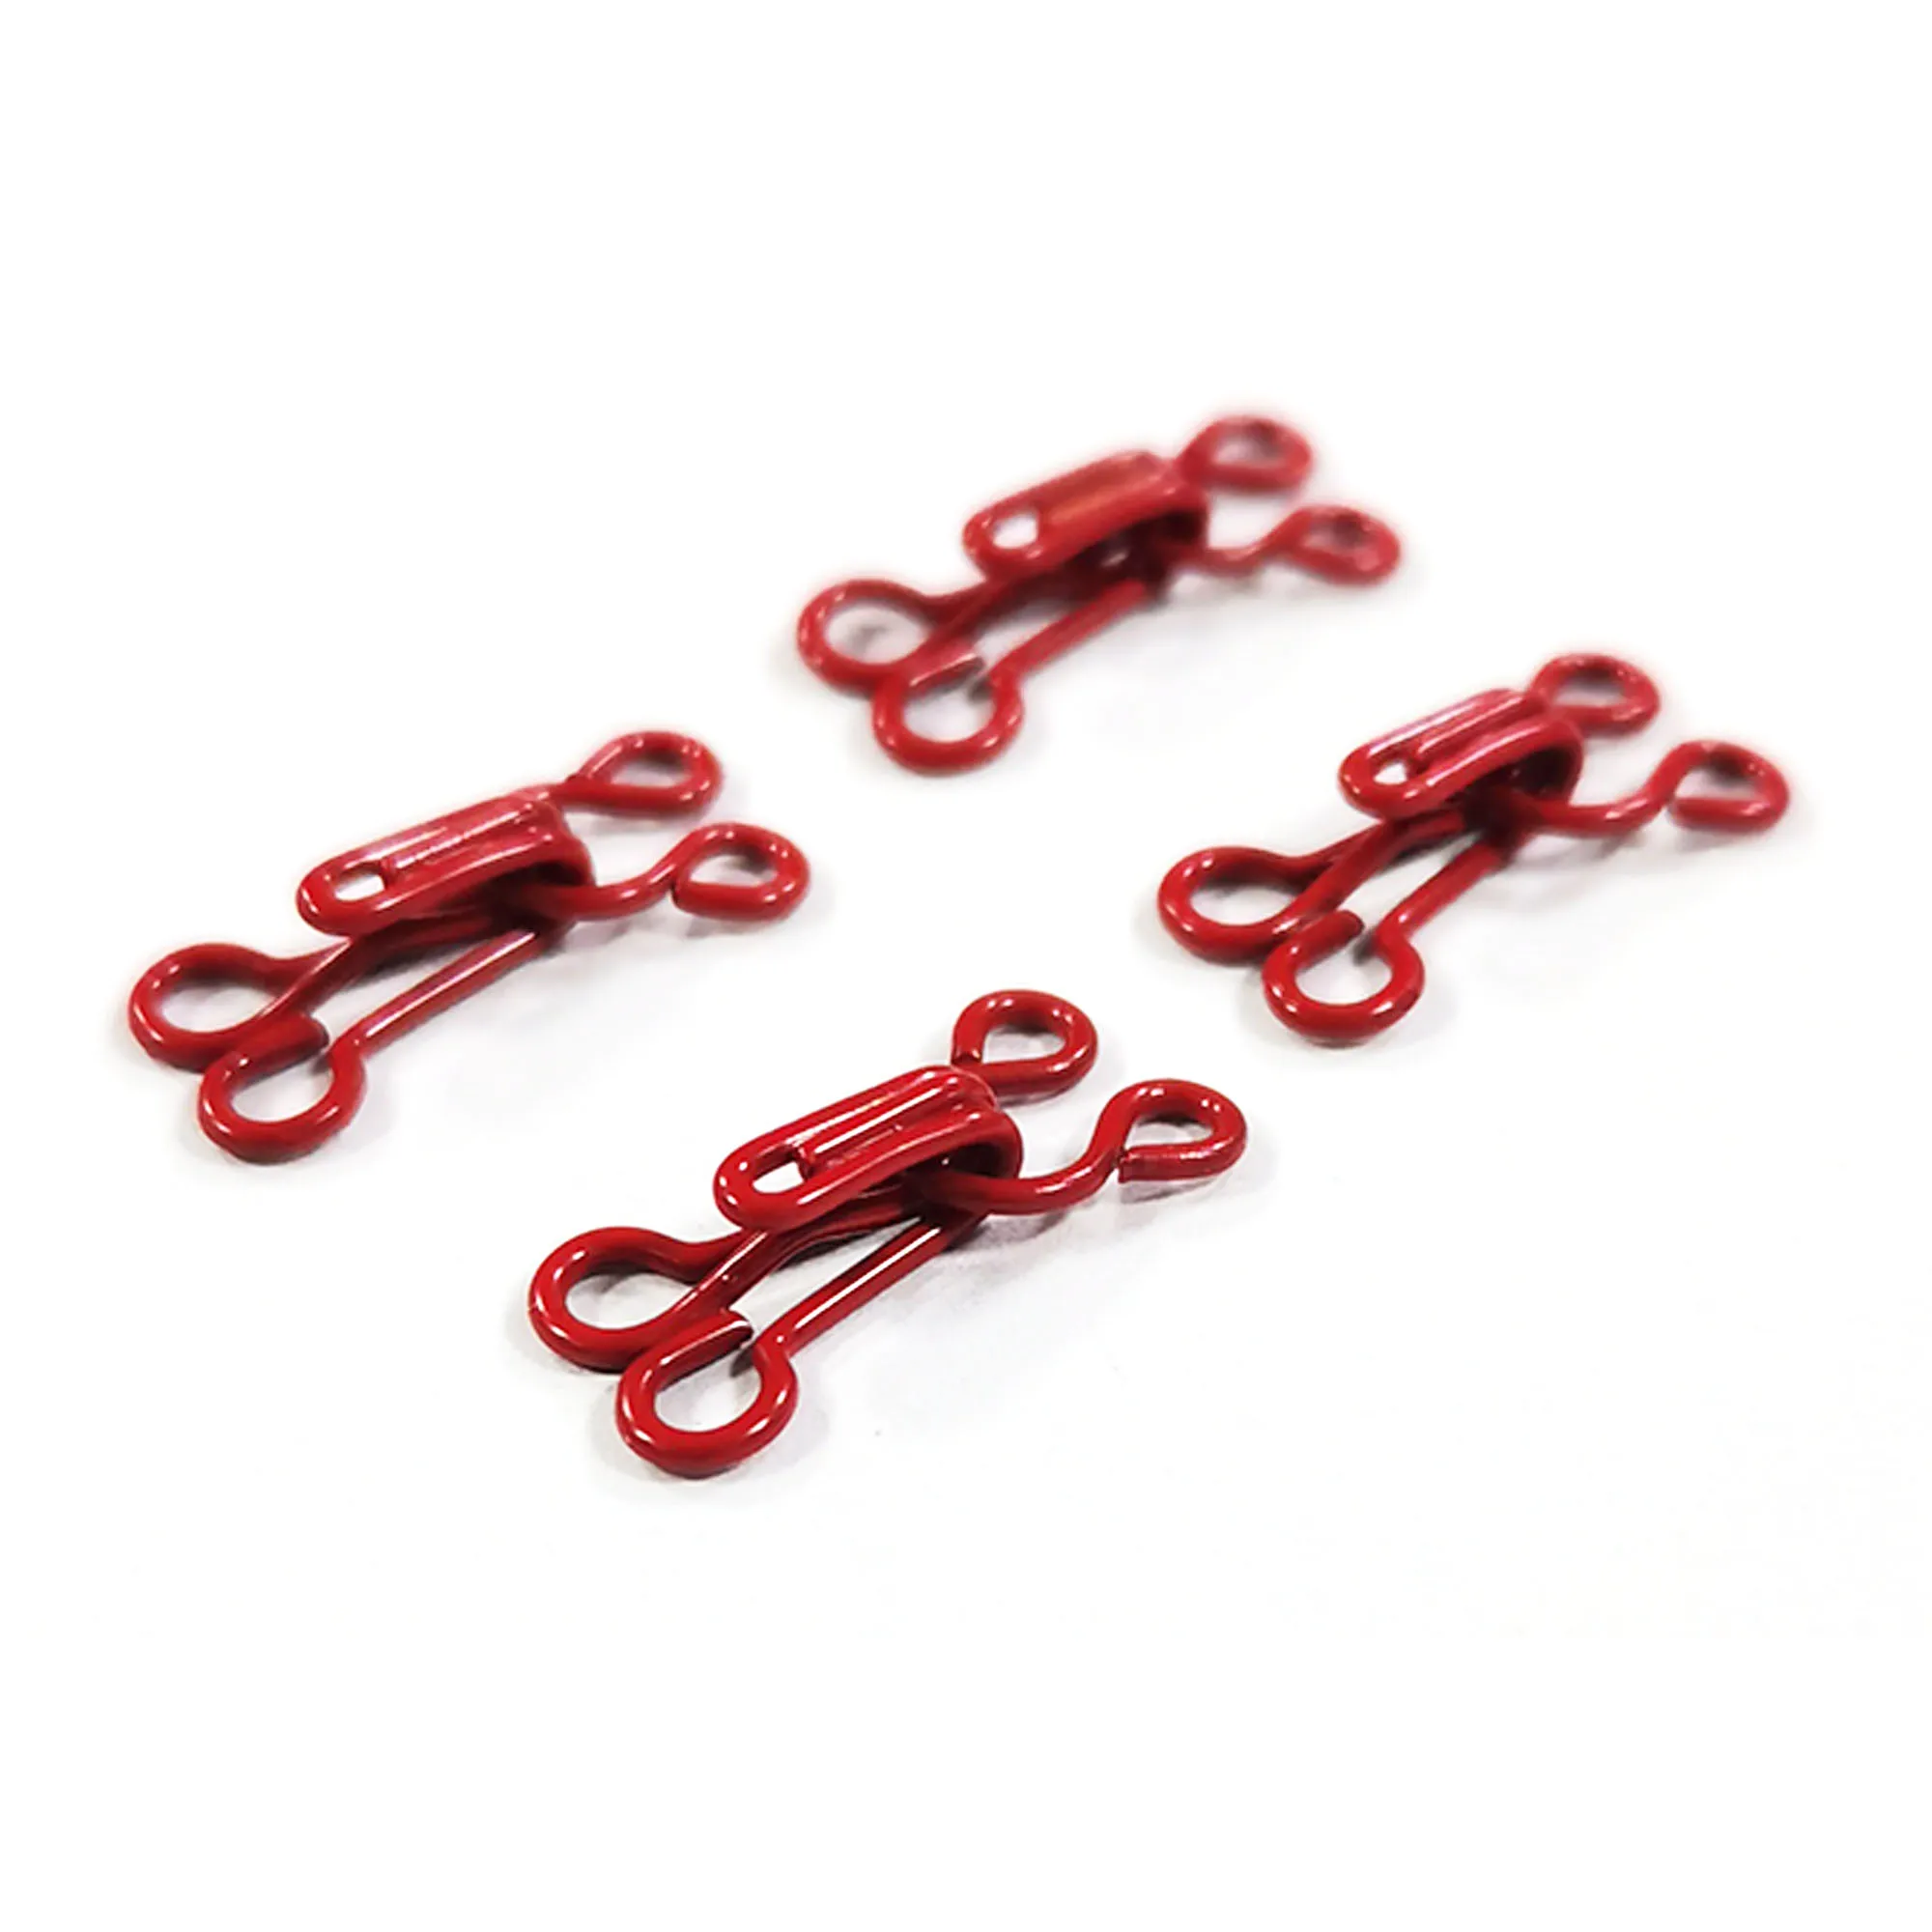 50 sets Red Hook Eye Closure Hook and Eye Clasp Clothing Hook